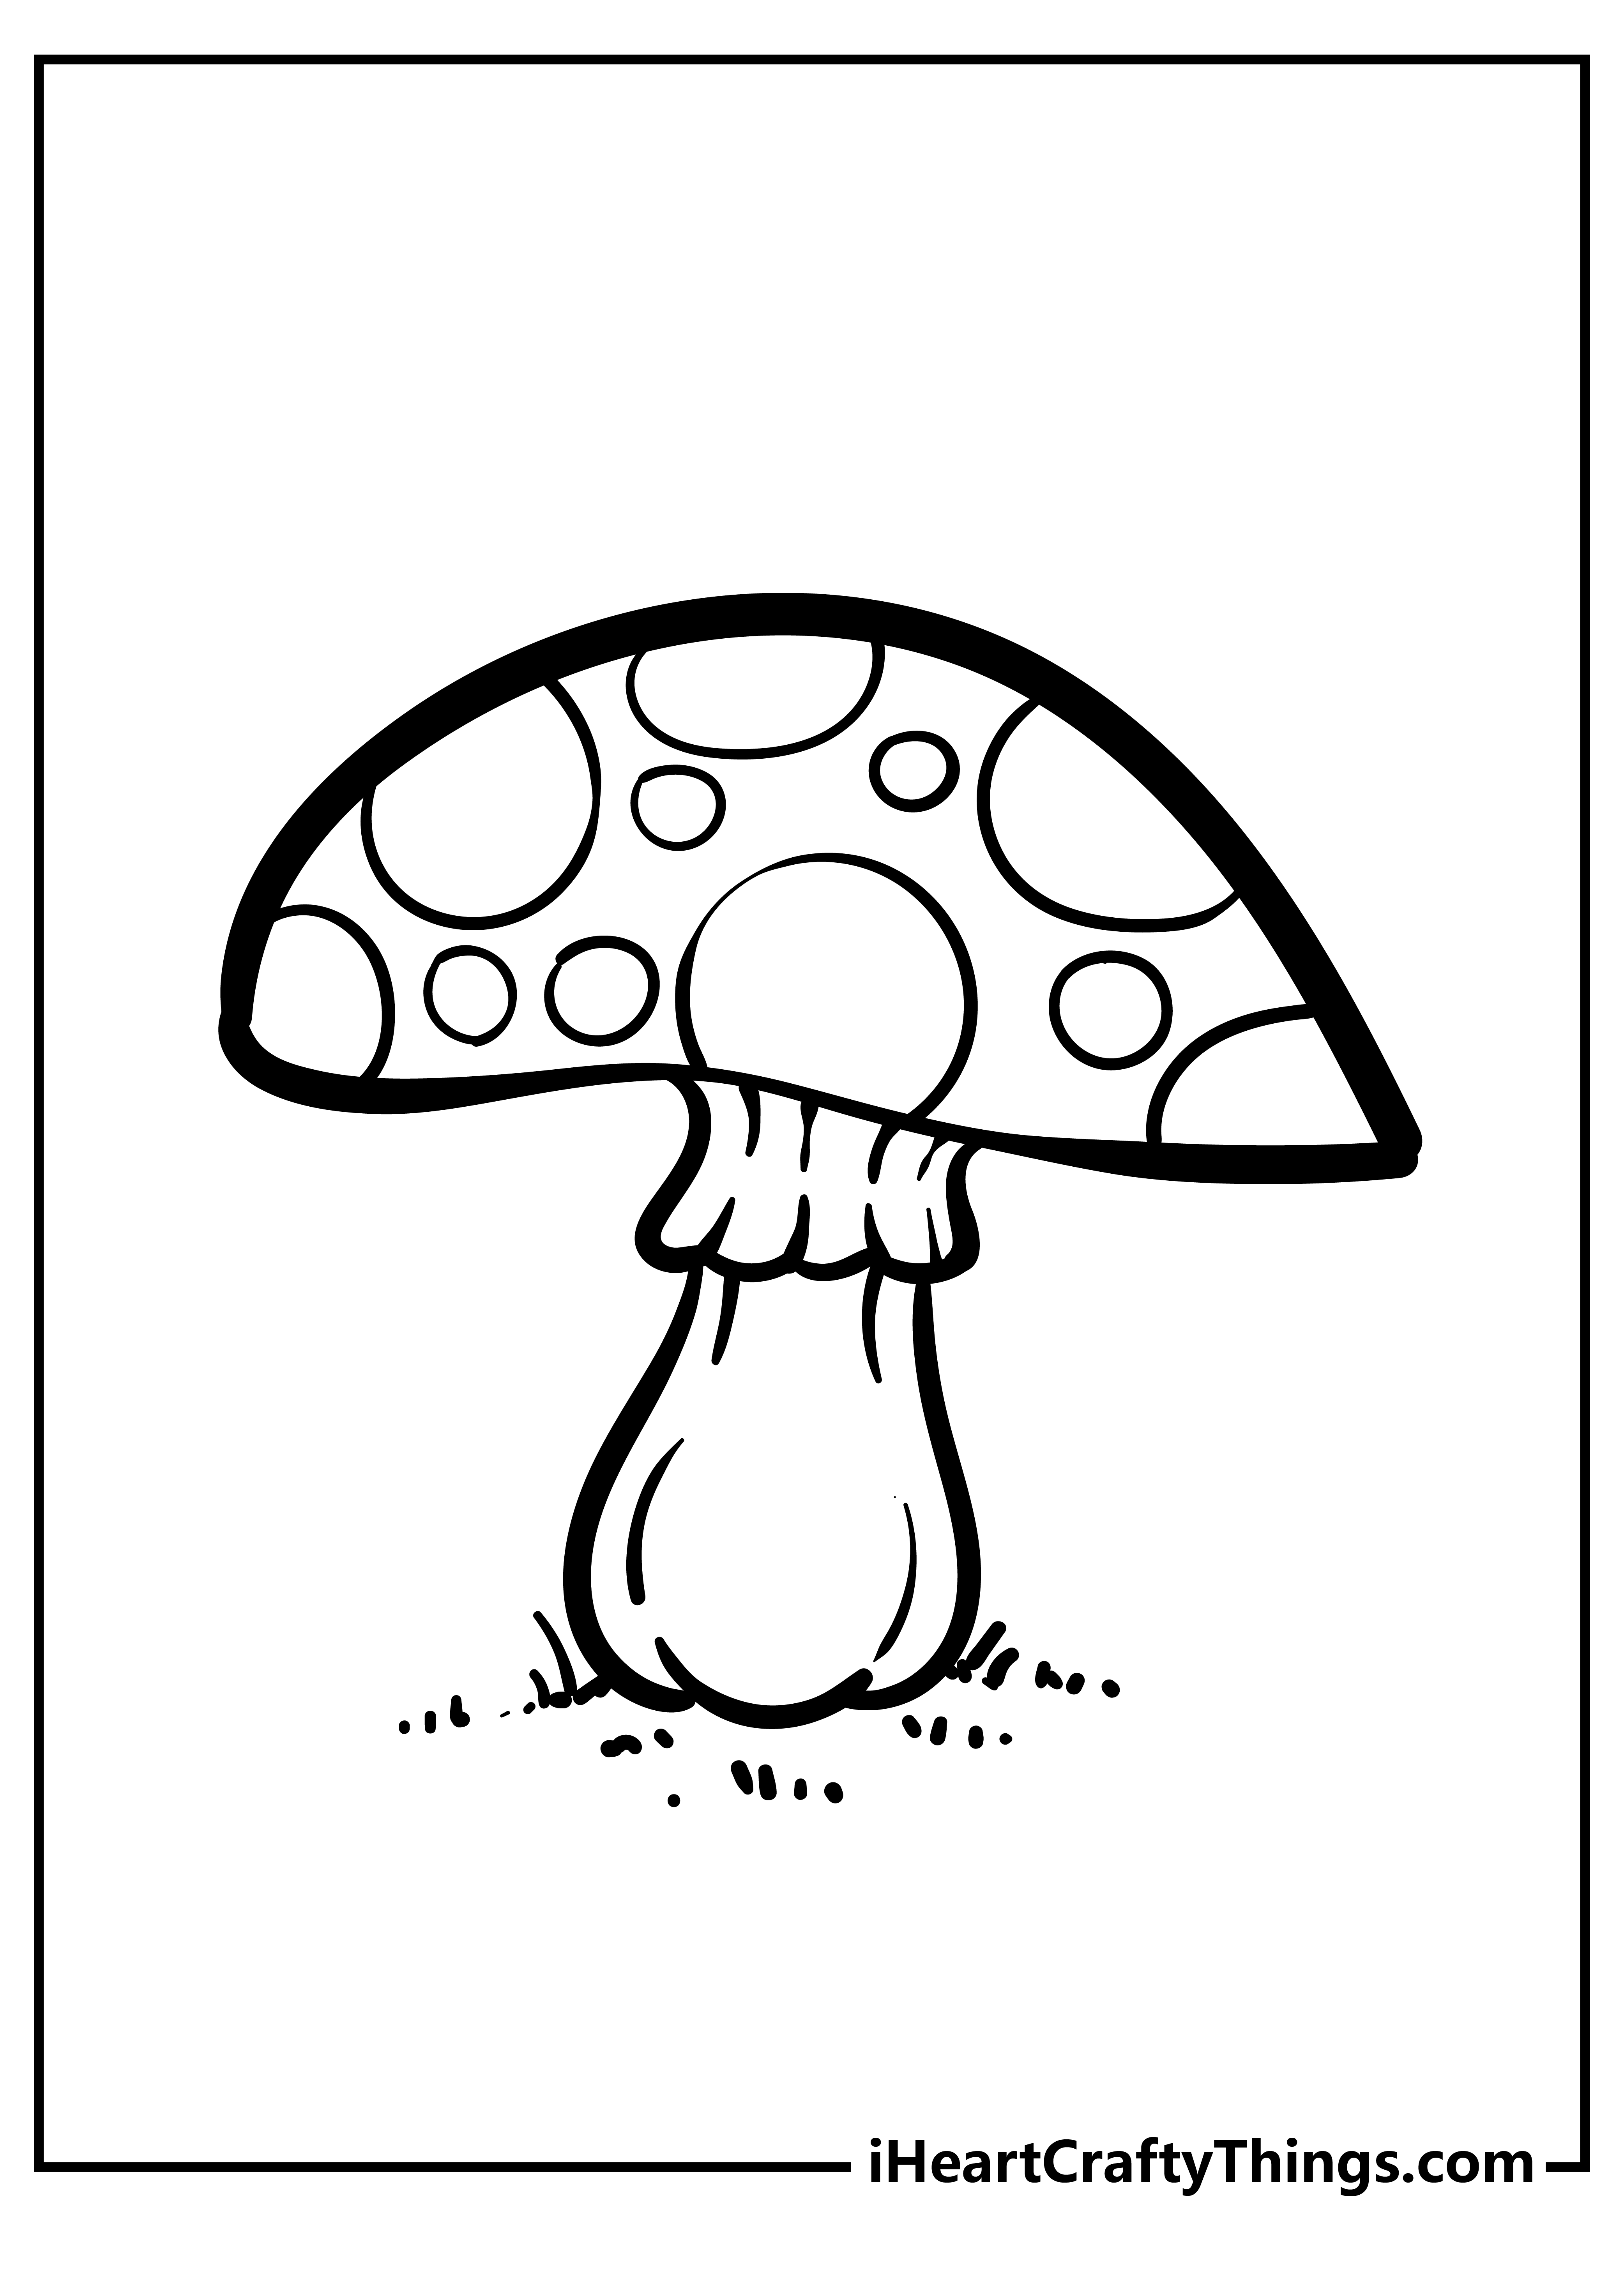 Mushroom Coloring Pages free pdf download